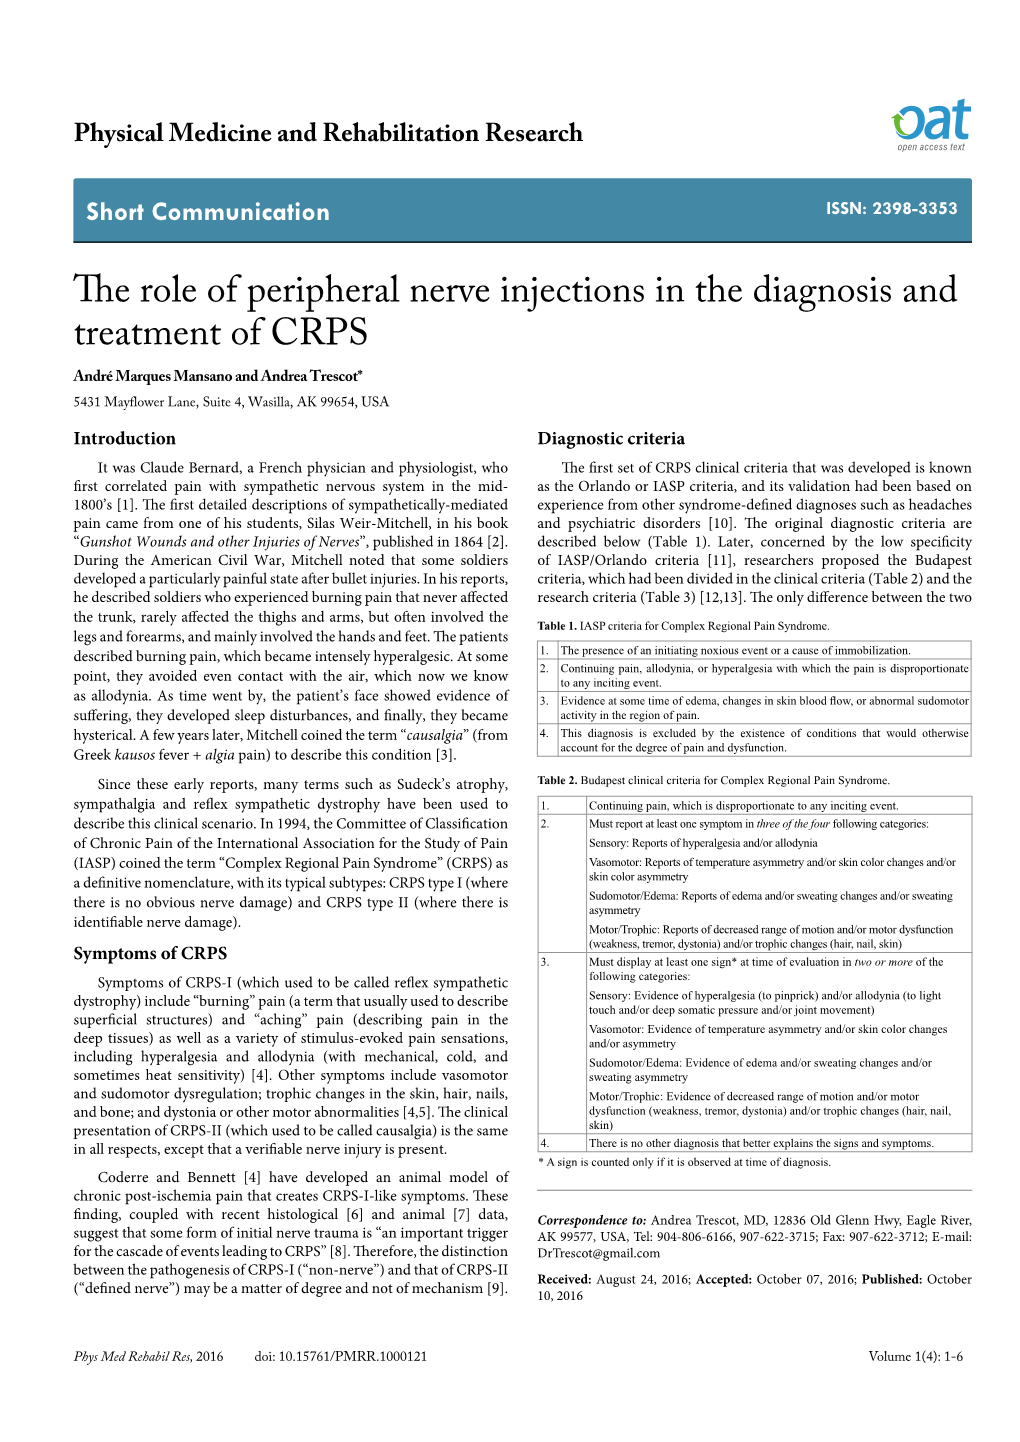 The Role of Peripheral Nerve Injections in the Diagnosis and Treatment Of